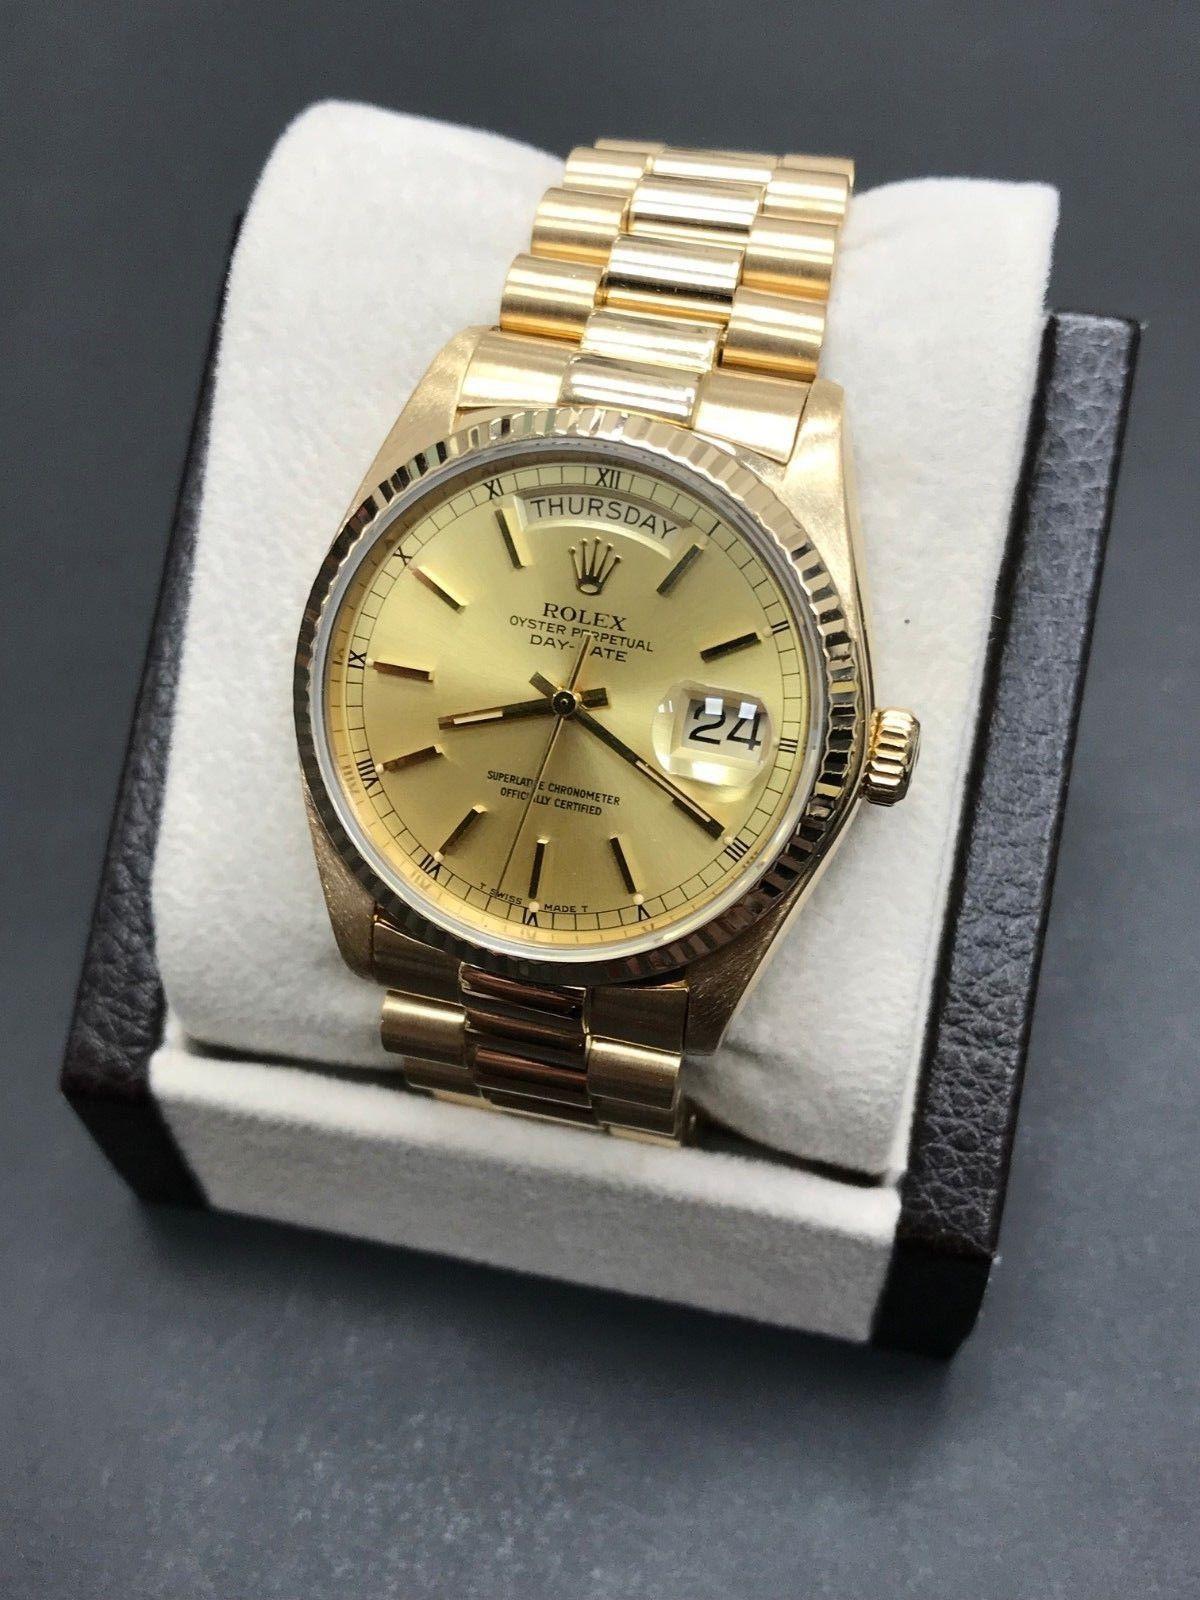 Style Number: 18038
Serial: 5382***
Model: President 
Case Material: 18K Yellow Gold 
Band: 18K Yellow Gold
Bezel: 18K Yellow Gold
Dial: Champagne  
Face: Sapphire Crystal 
Case Size: 36mm 
Includes: 
-Elegant Watch Box
-Certified Appraisal 
-6